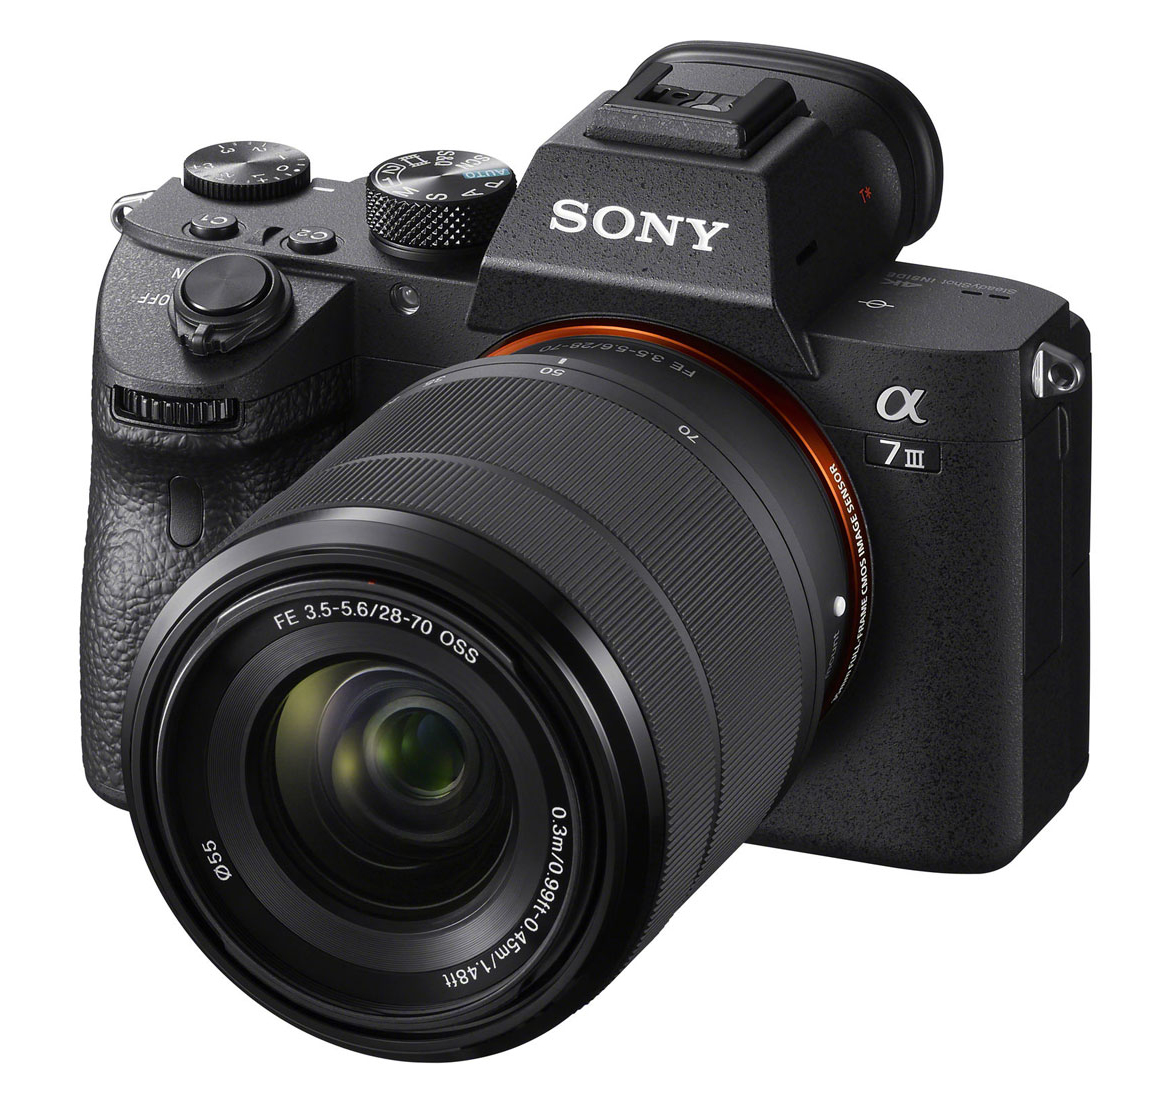 Sony Alpha a7 III 28-70mm | F3.5-5.6 Compass Camera Full Kit 24.2MP mm OSS Mirrorless FE with 28-70 Lens Systems Frame Full